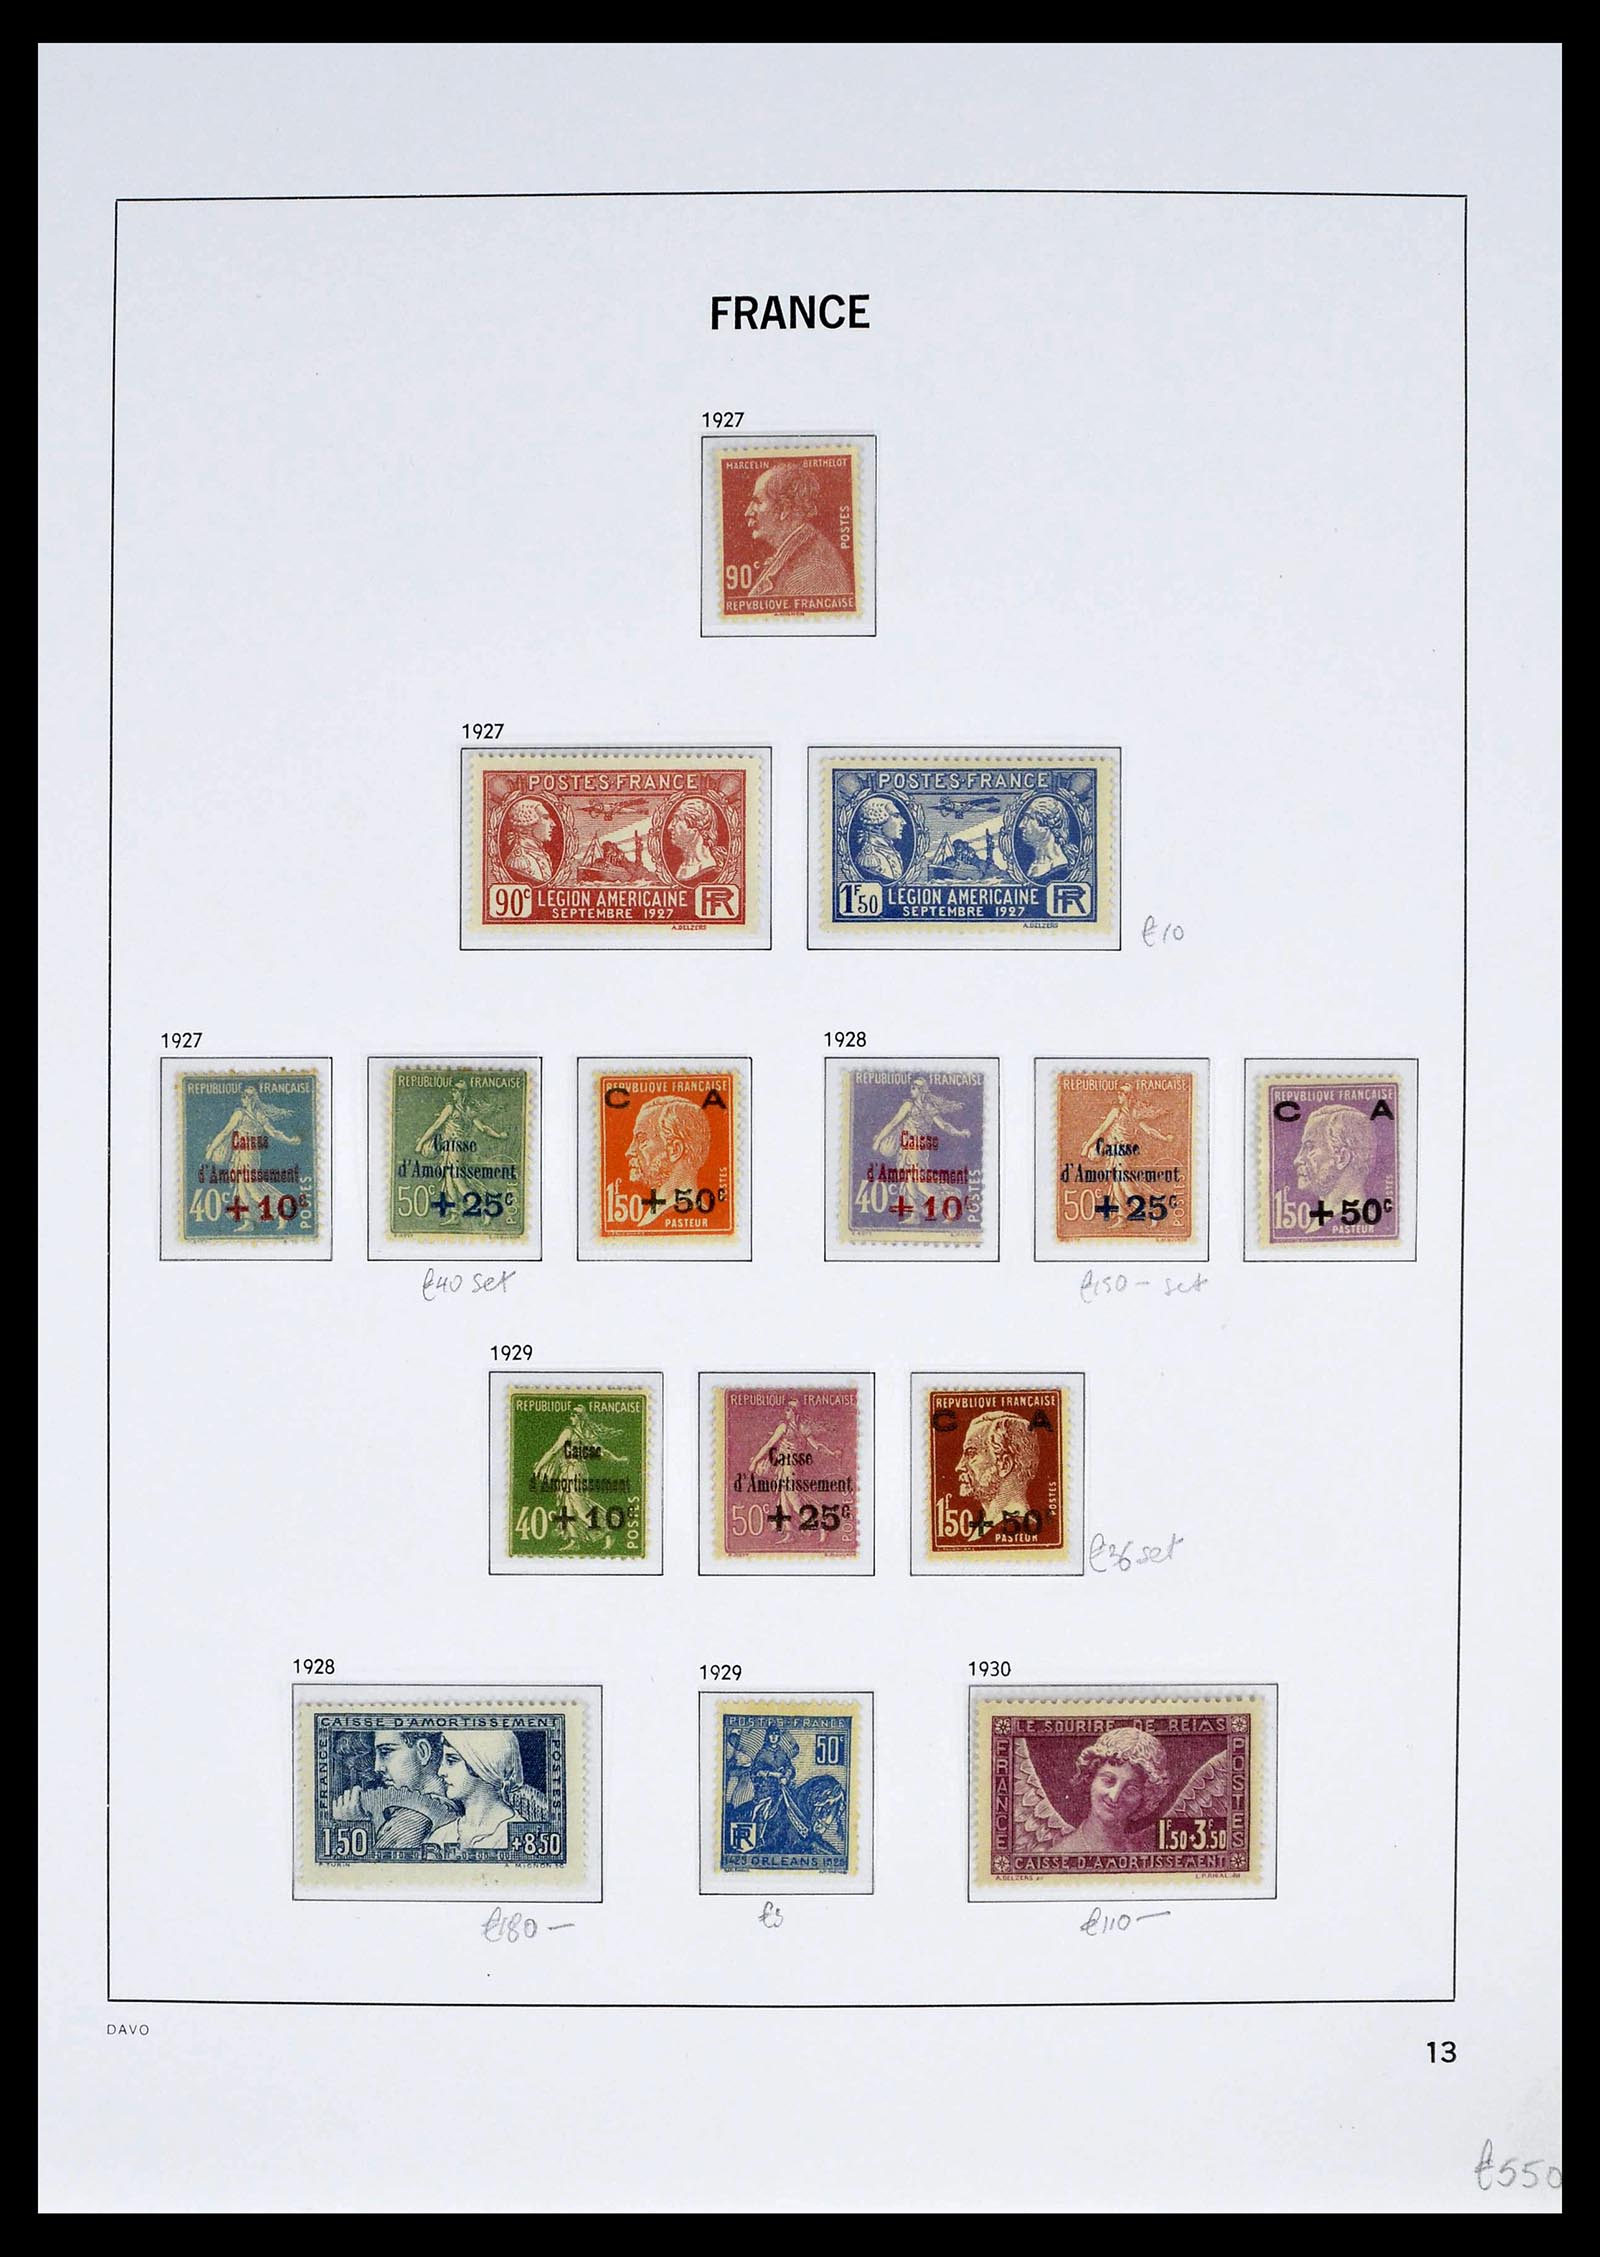 39335 0028 - Stamp collection 39335 France 1849-1969.